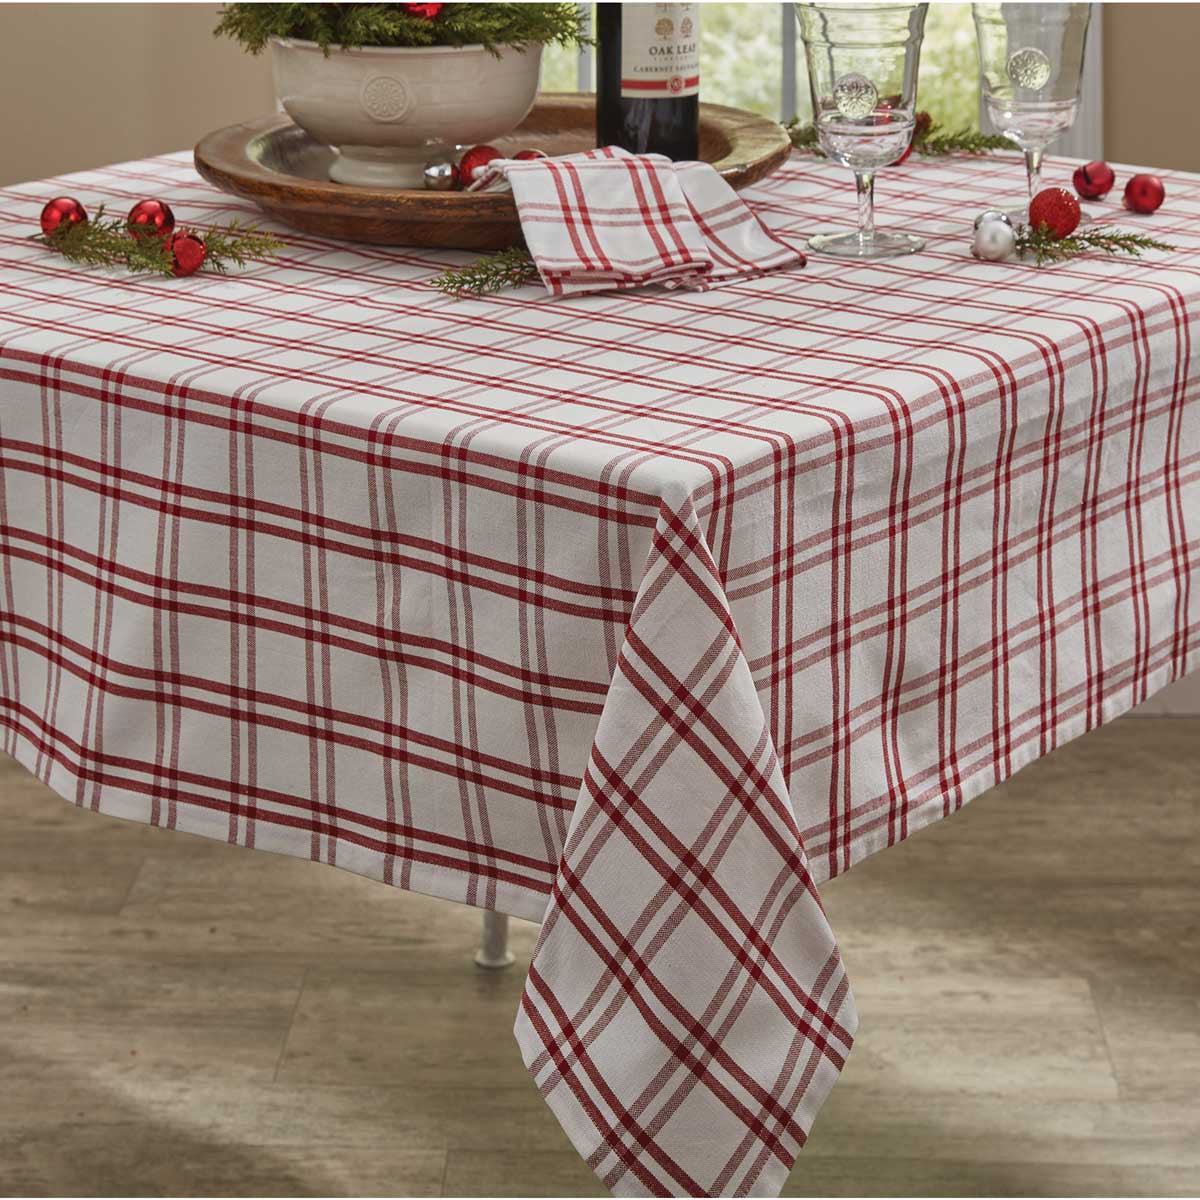 Yuletide Cheer Tablecloth - 54" Park Designs